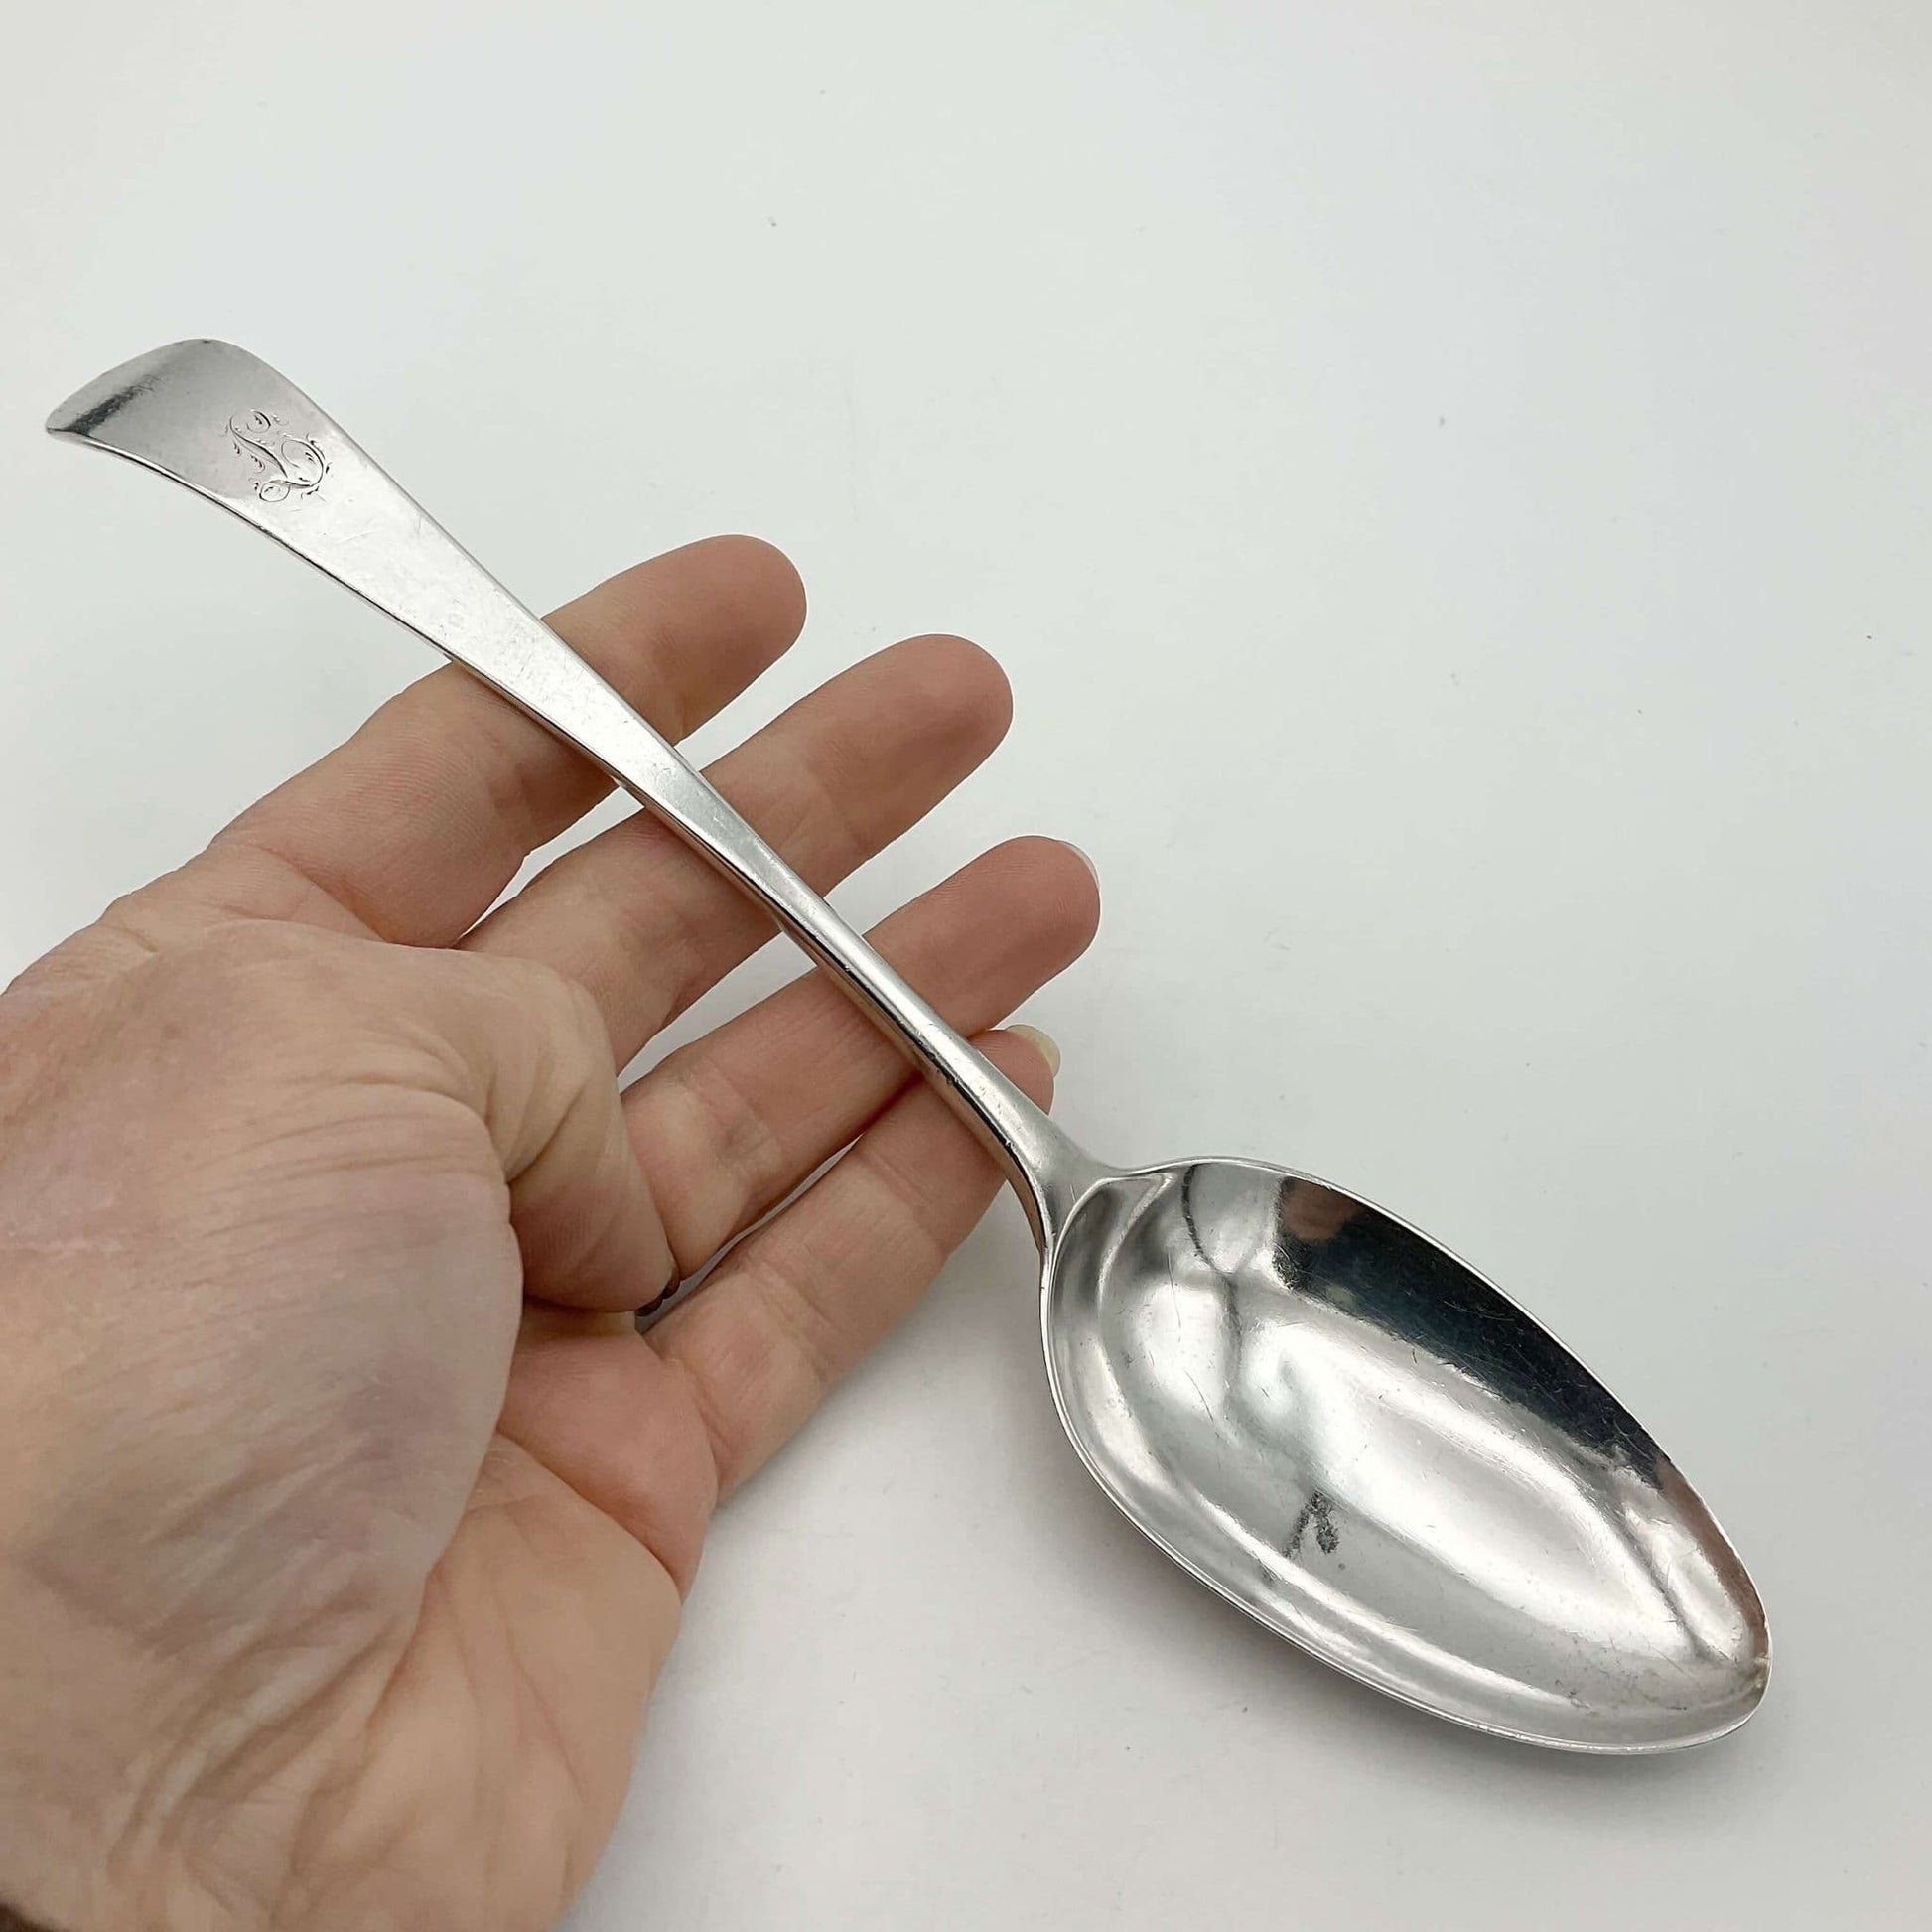 Antique silver serving spoonon held in a hand on a white background